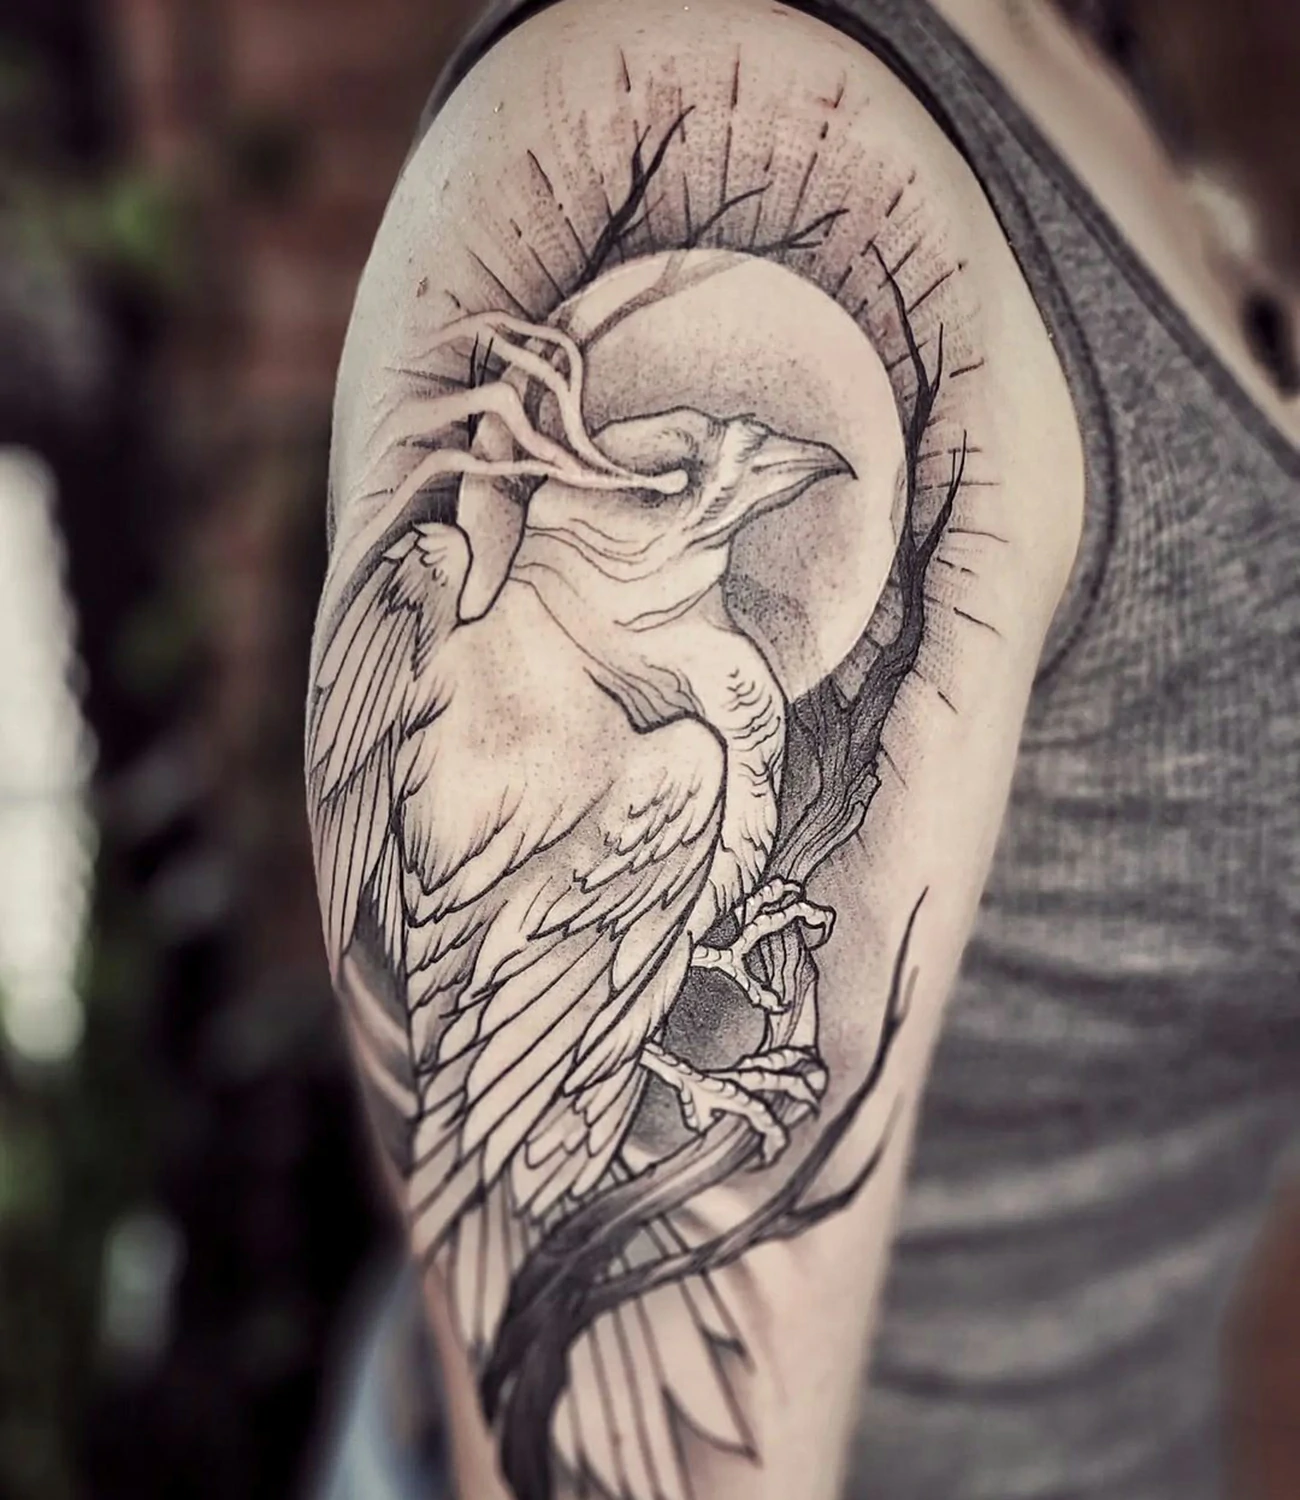 White raven tattoo: A unique twist with a raven tattoo depicted in white ink.